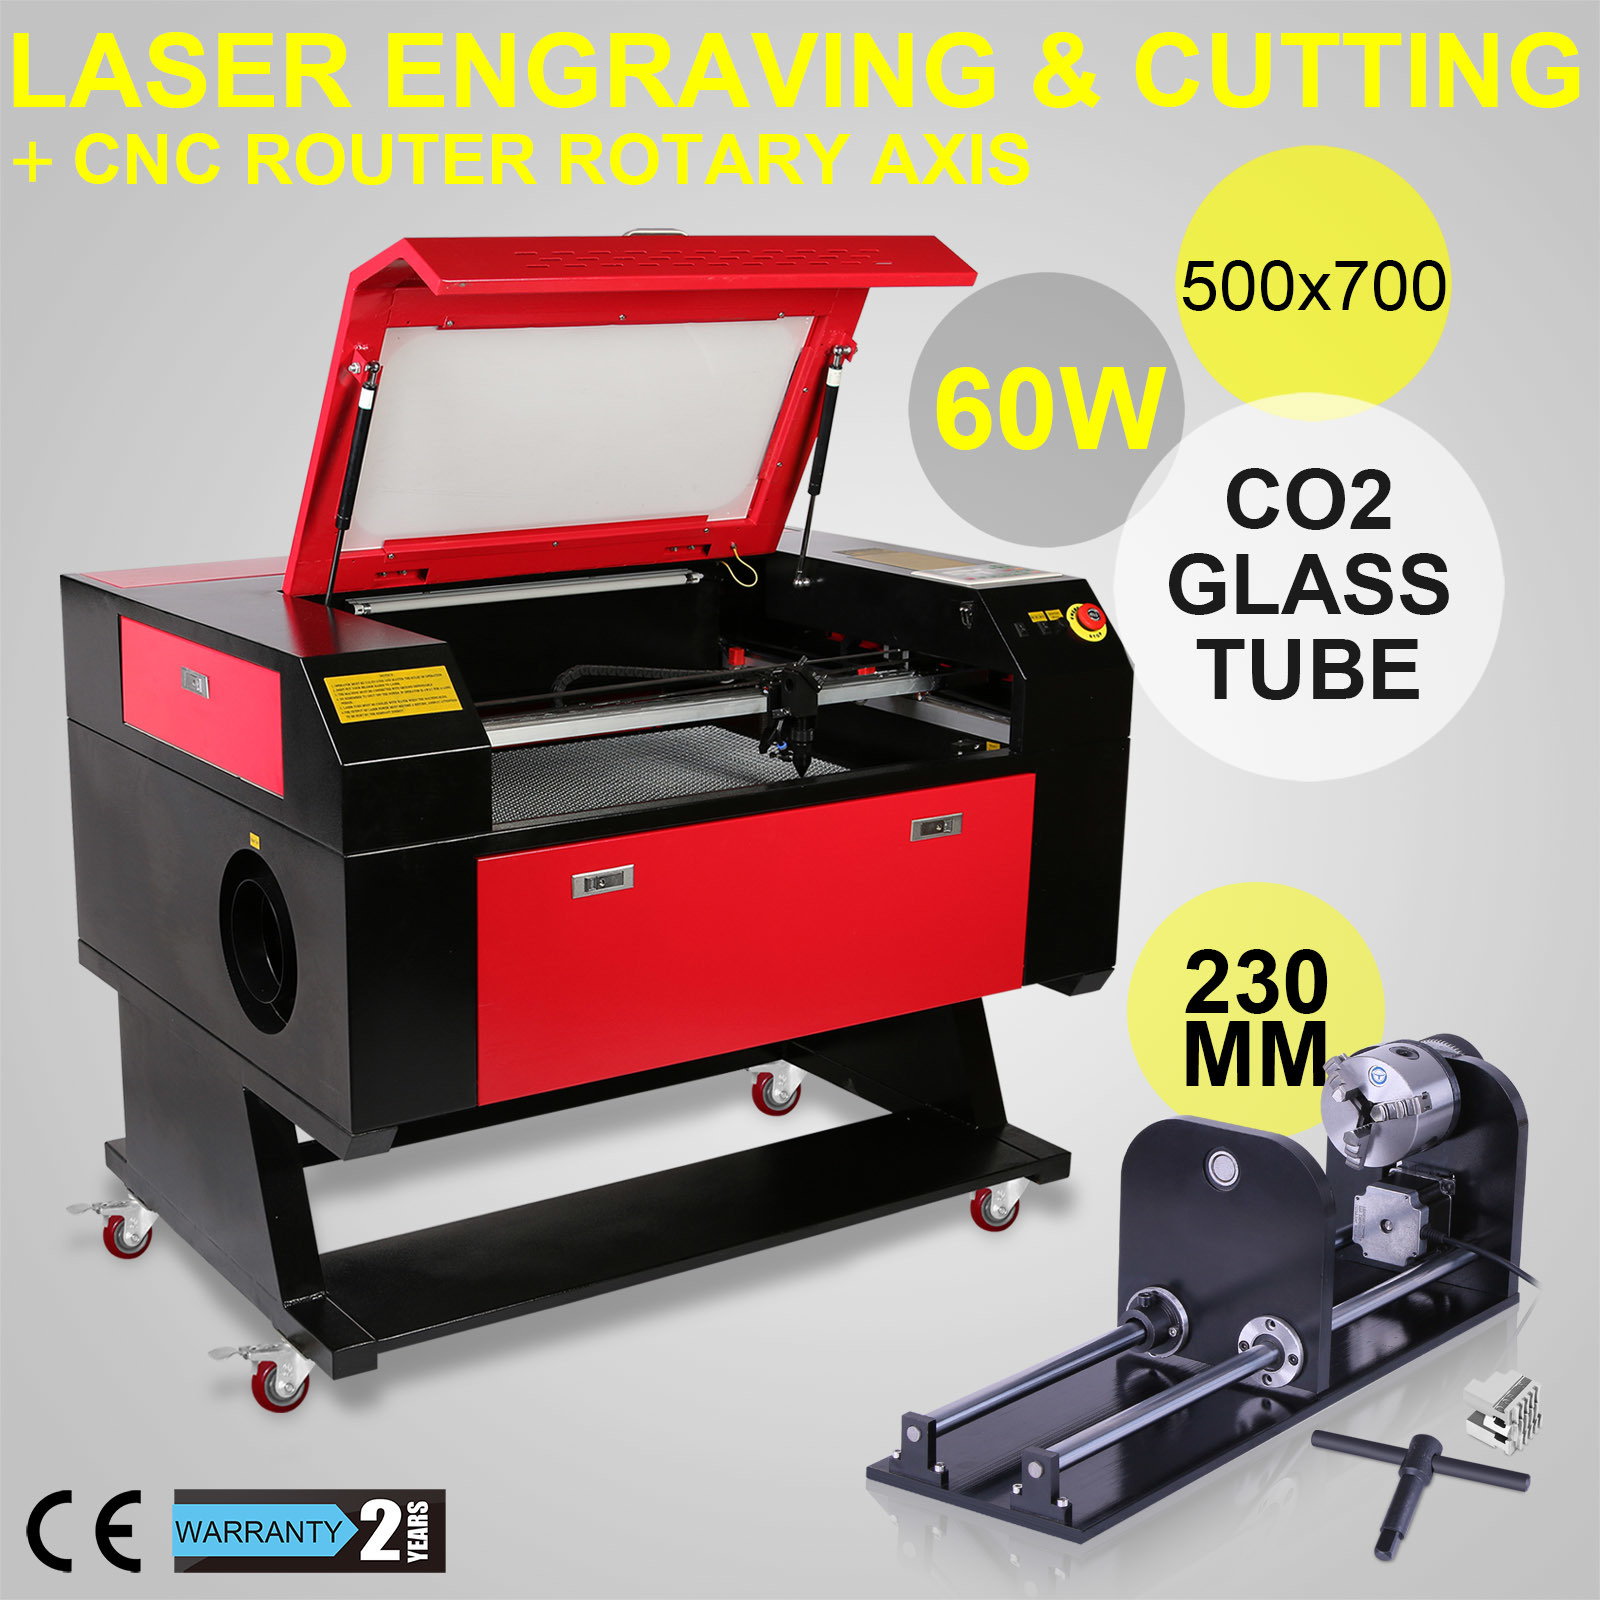 60W Laser Engraving Machine with Rotary Axis